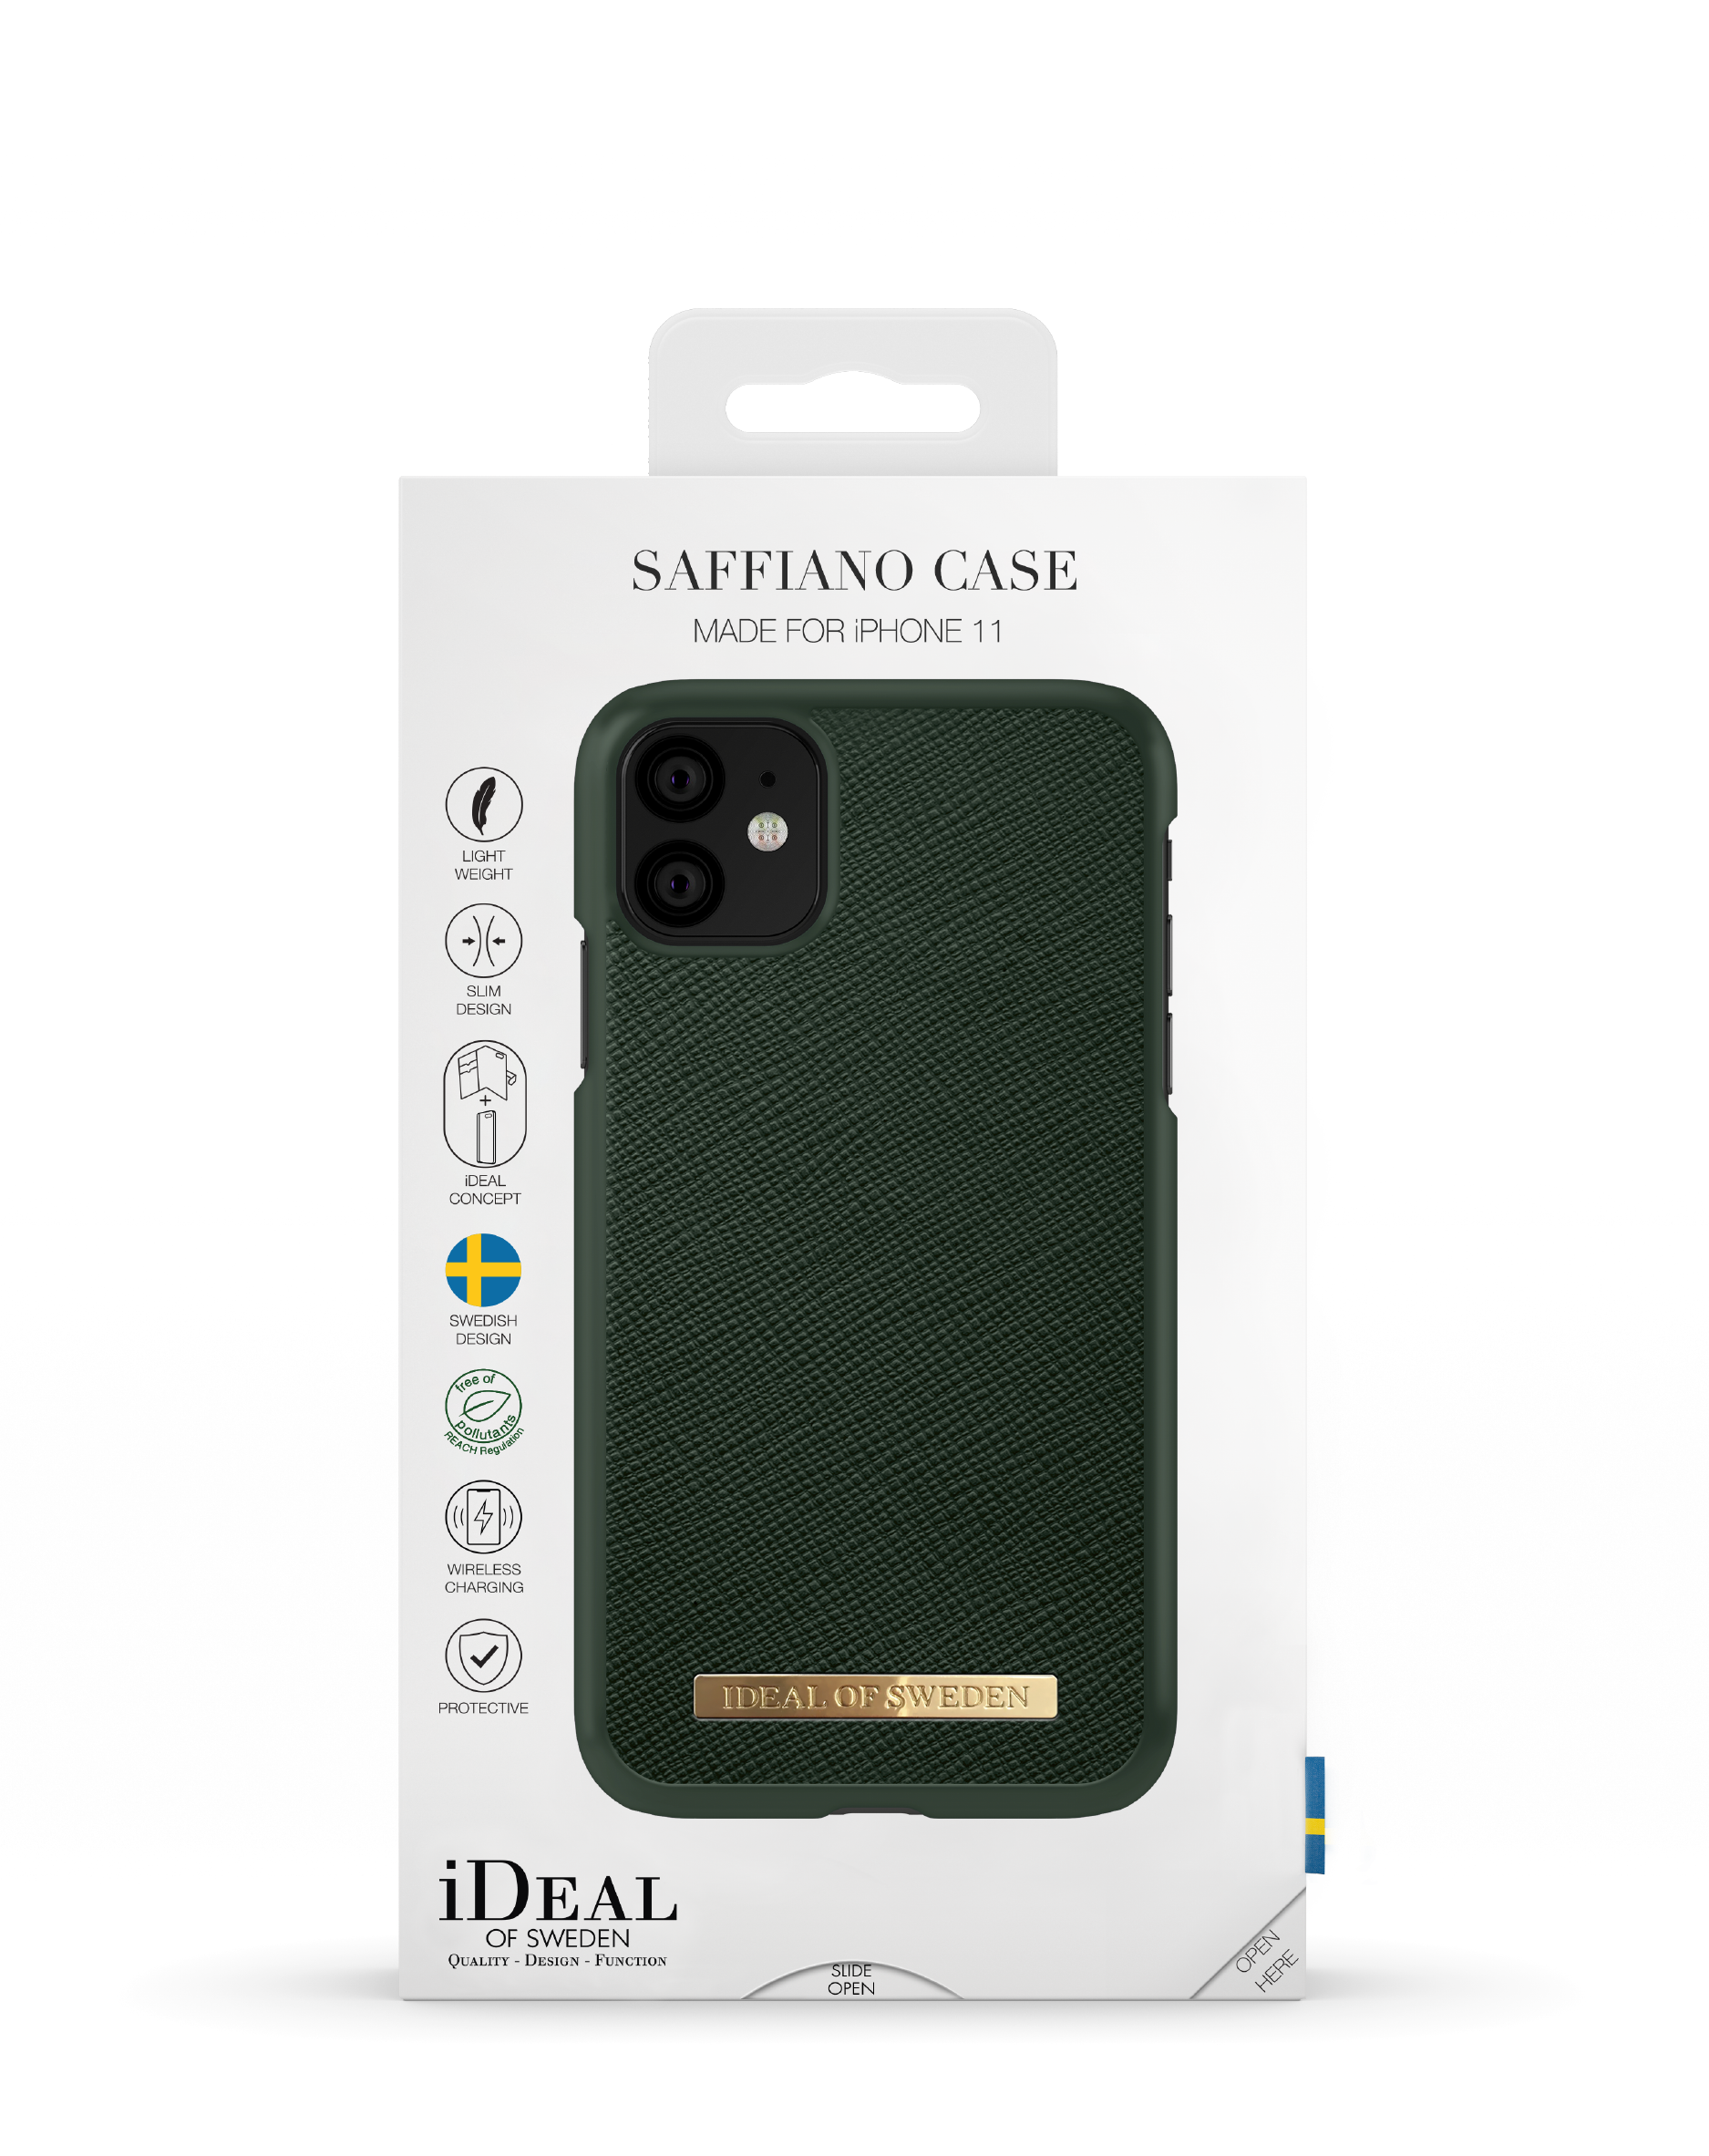 11, Apple IDFCSA-I1961-156, Apple XR, Apple, iPhone IDEAL SWEDEN OF Green Backcover, iPhone